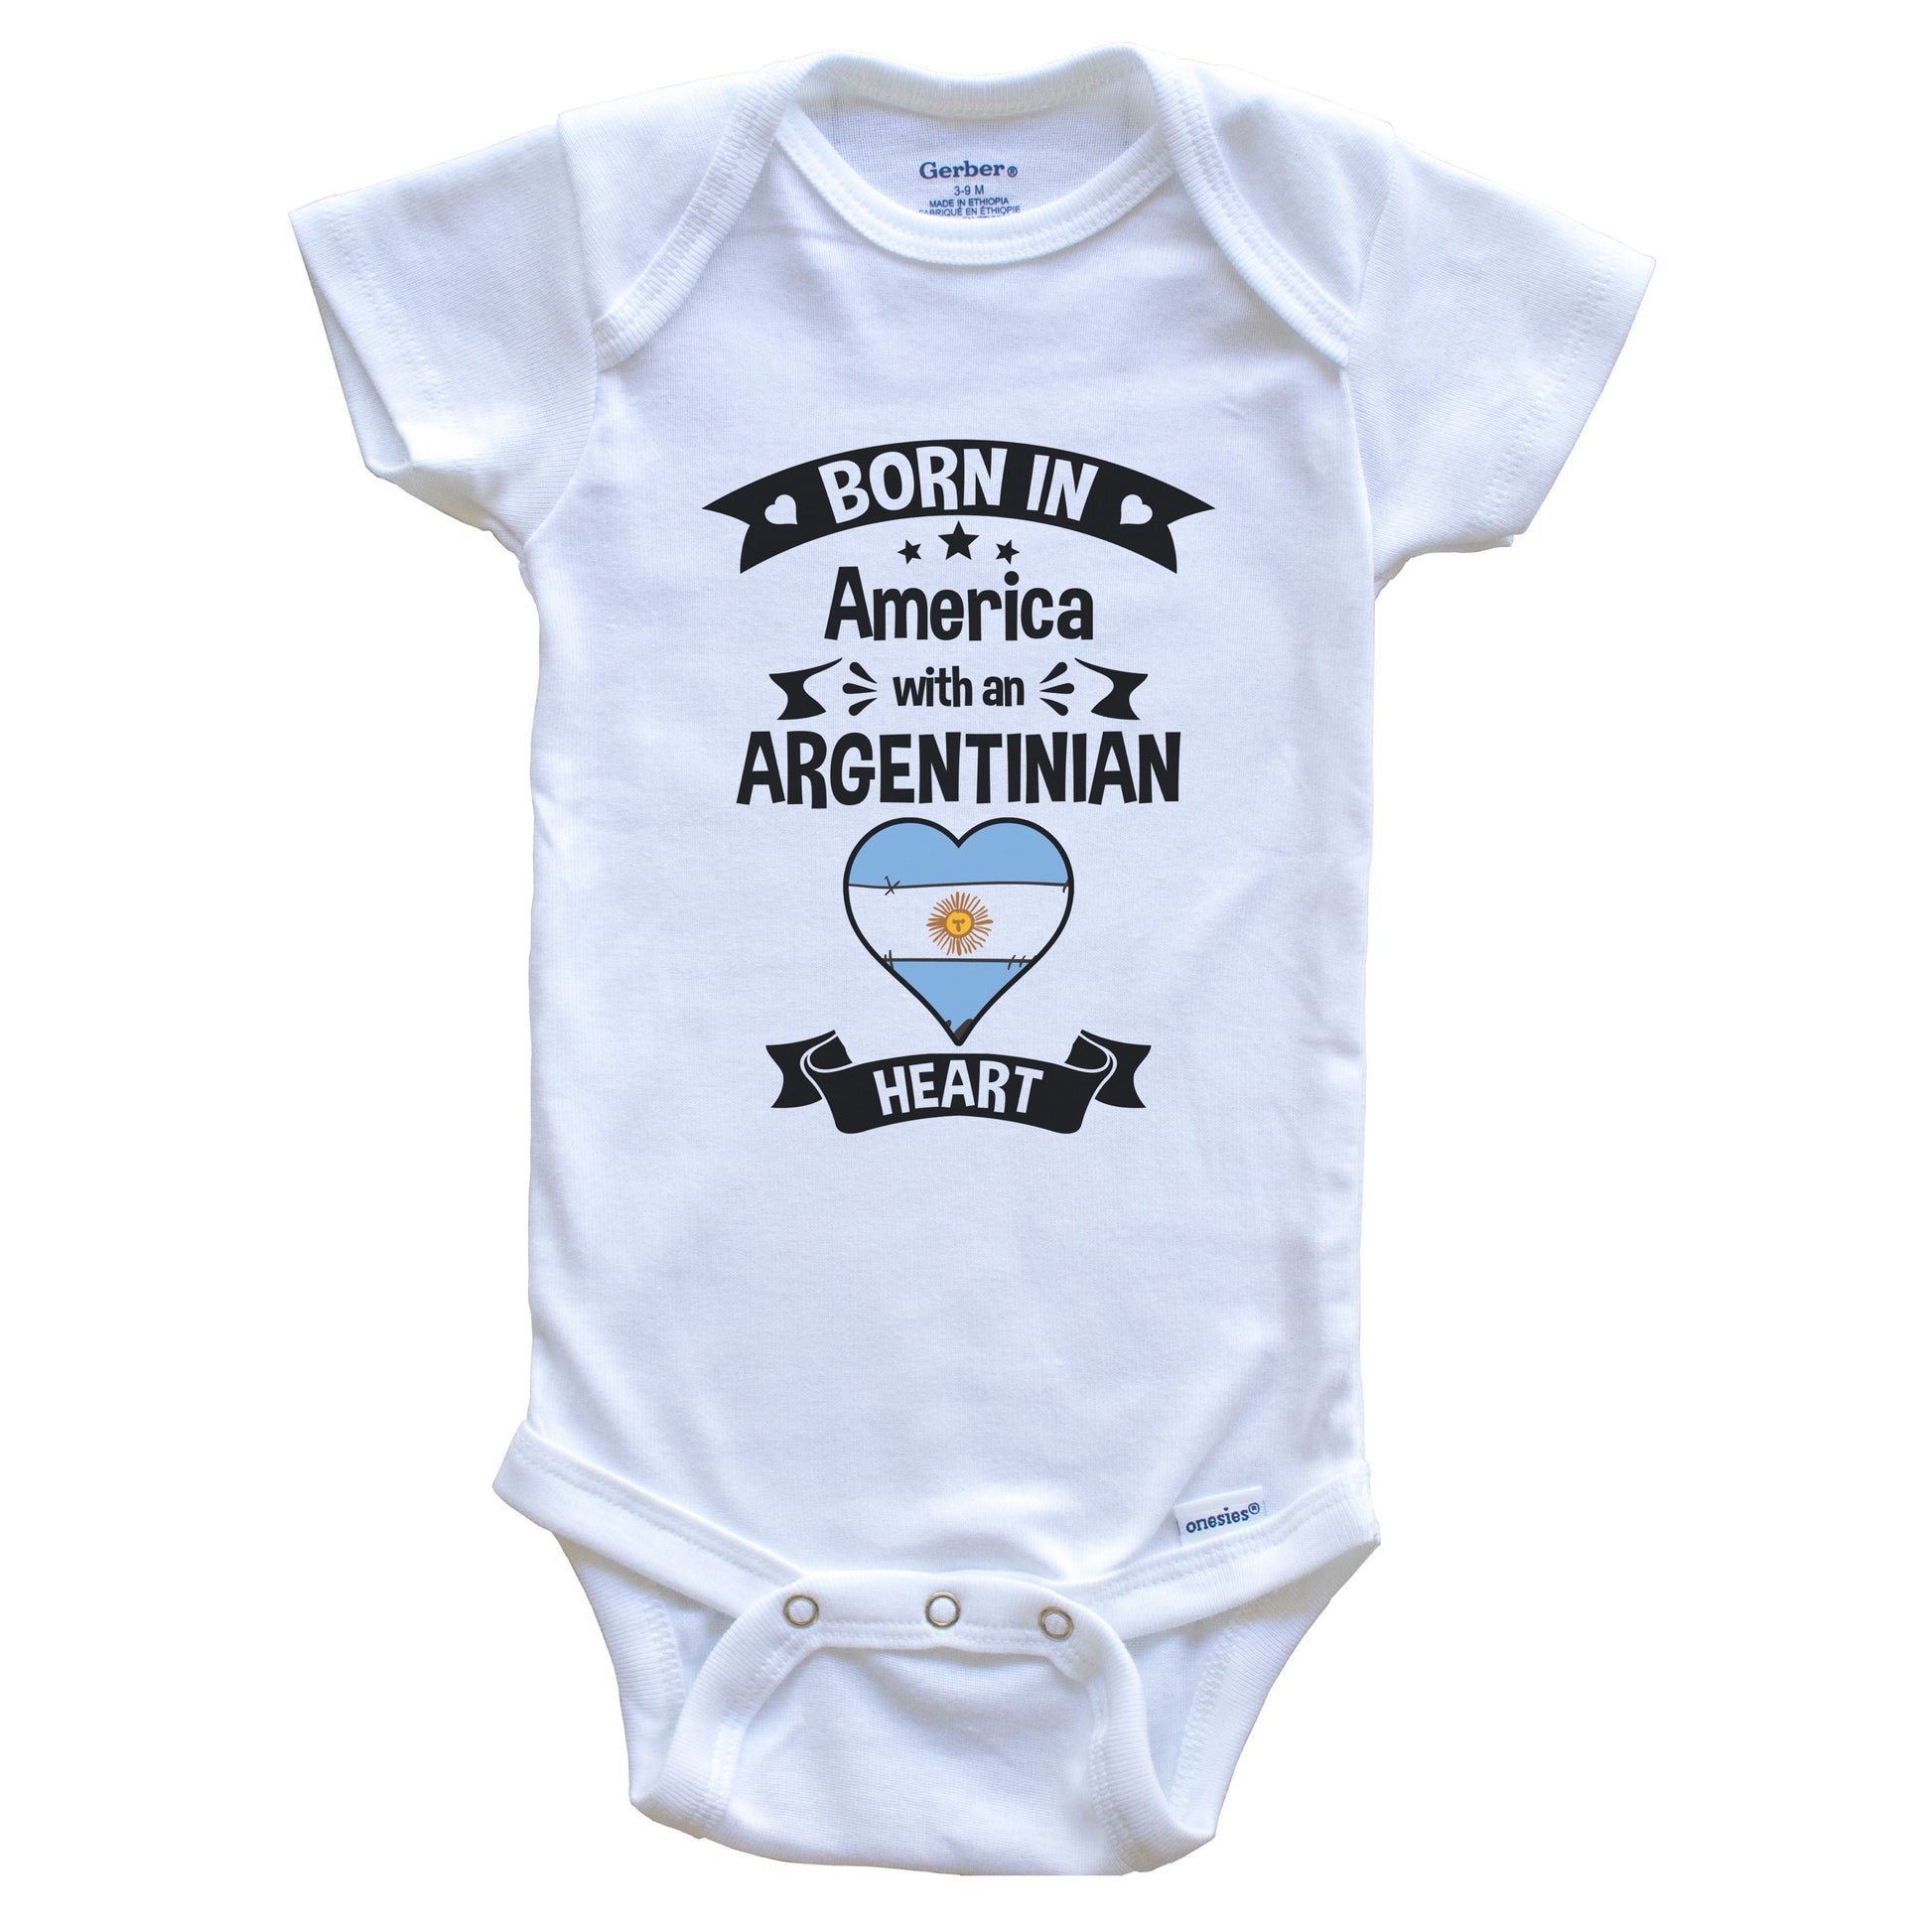 Born In America With An Argentinian Heart Baby Onesie